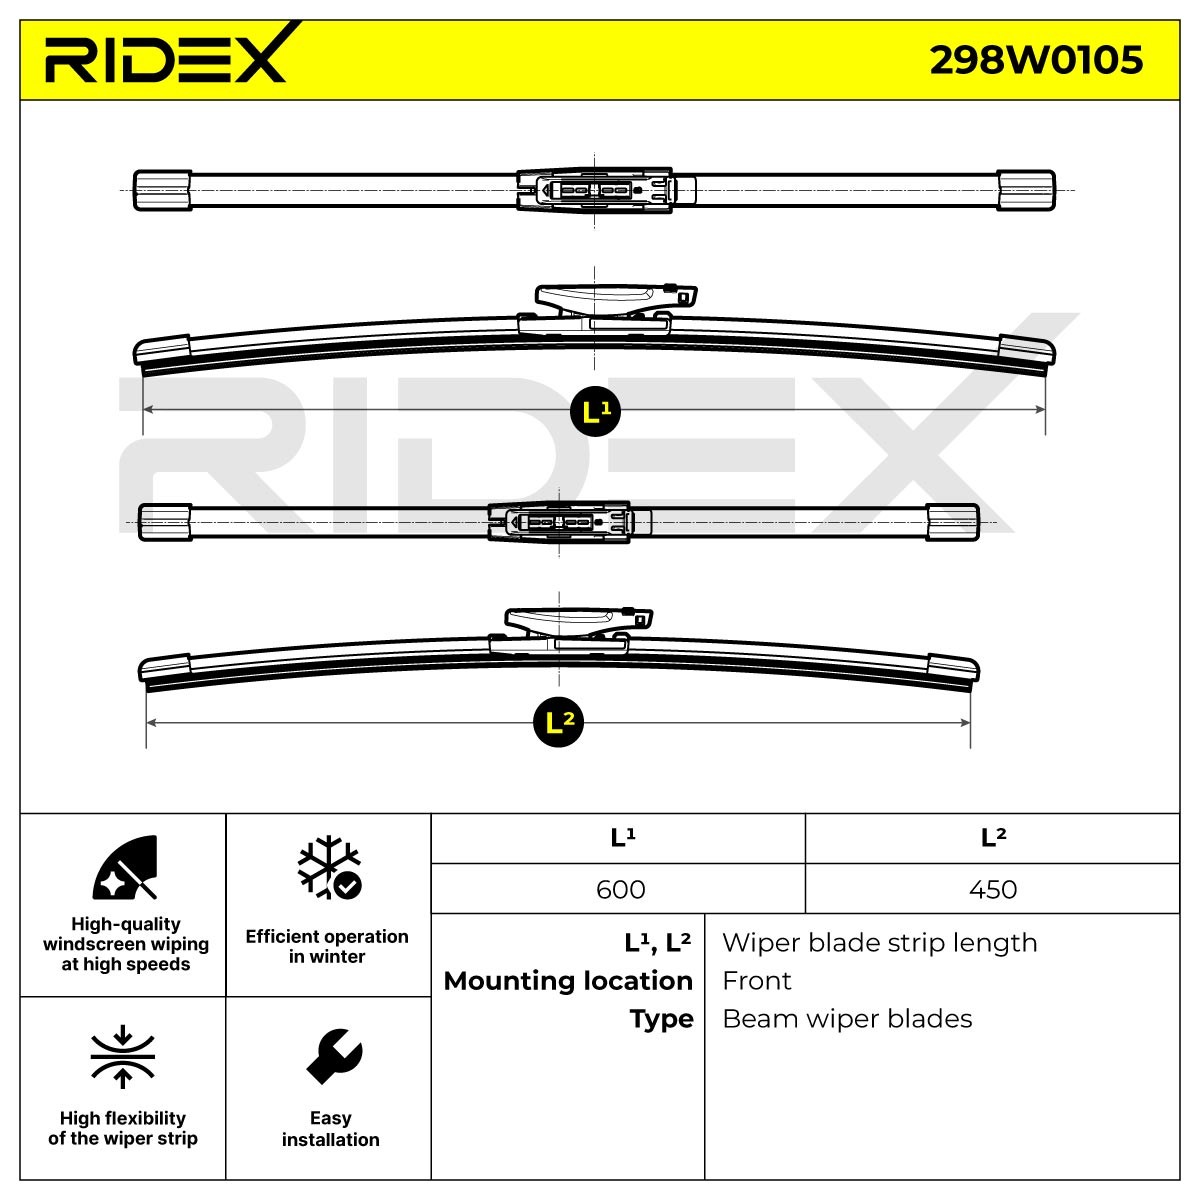 298W0105 Window wiper 298W0105 RIDEX 600, 450 mm Front, Beam, with spoiler, for left-hand drive vehicles, 24/18 Inch